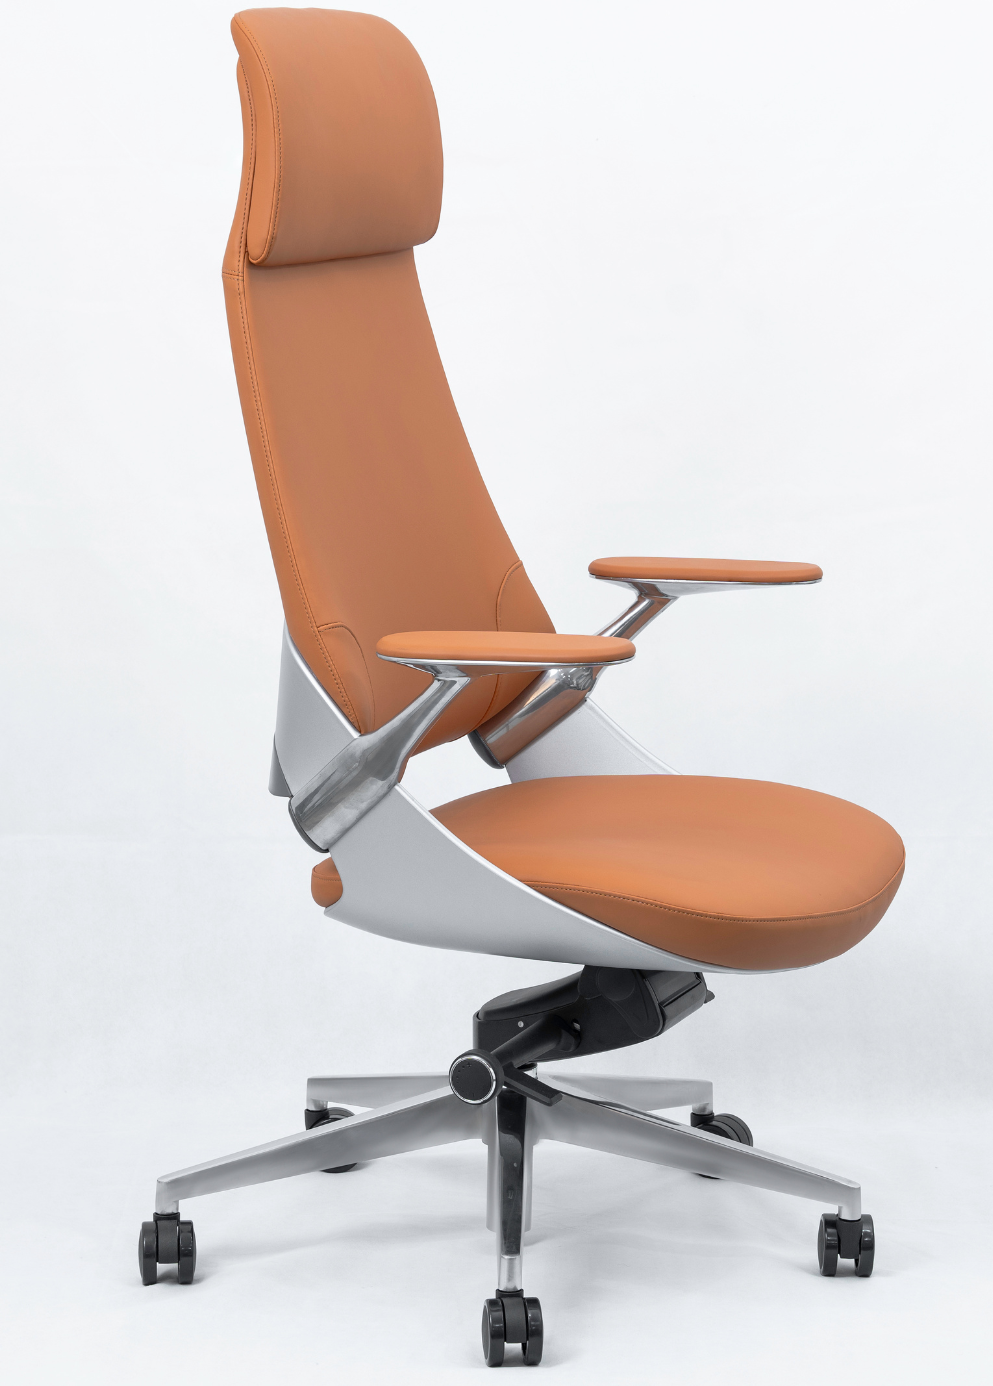 BOSQ’s Hacer Model: An Epitome Of Aesthetics And Comfort